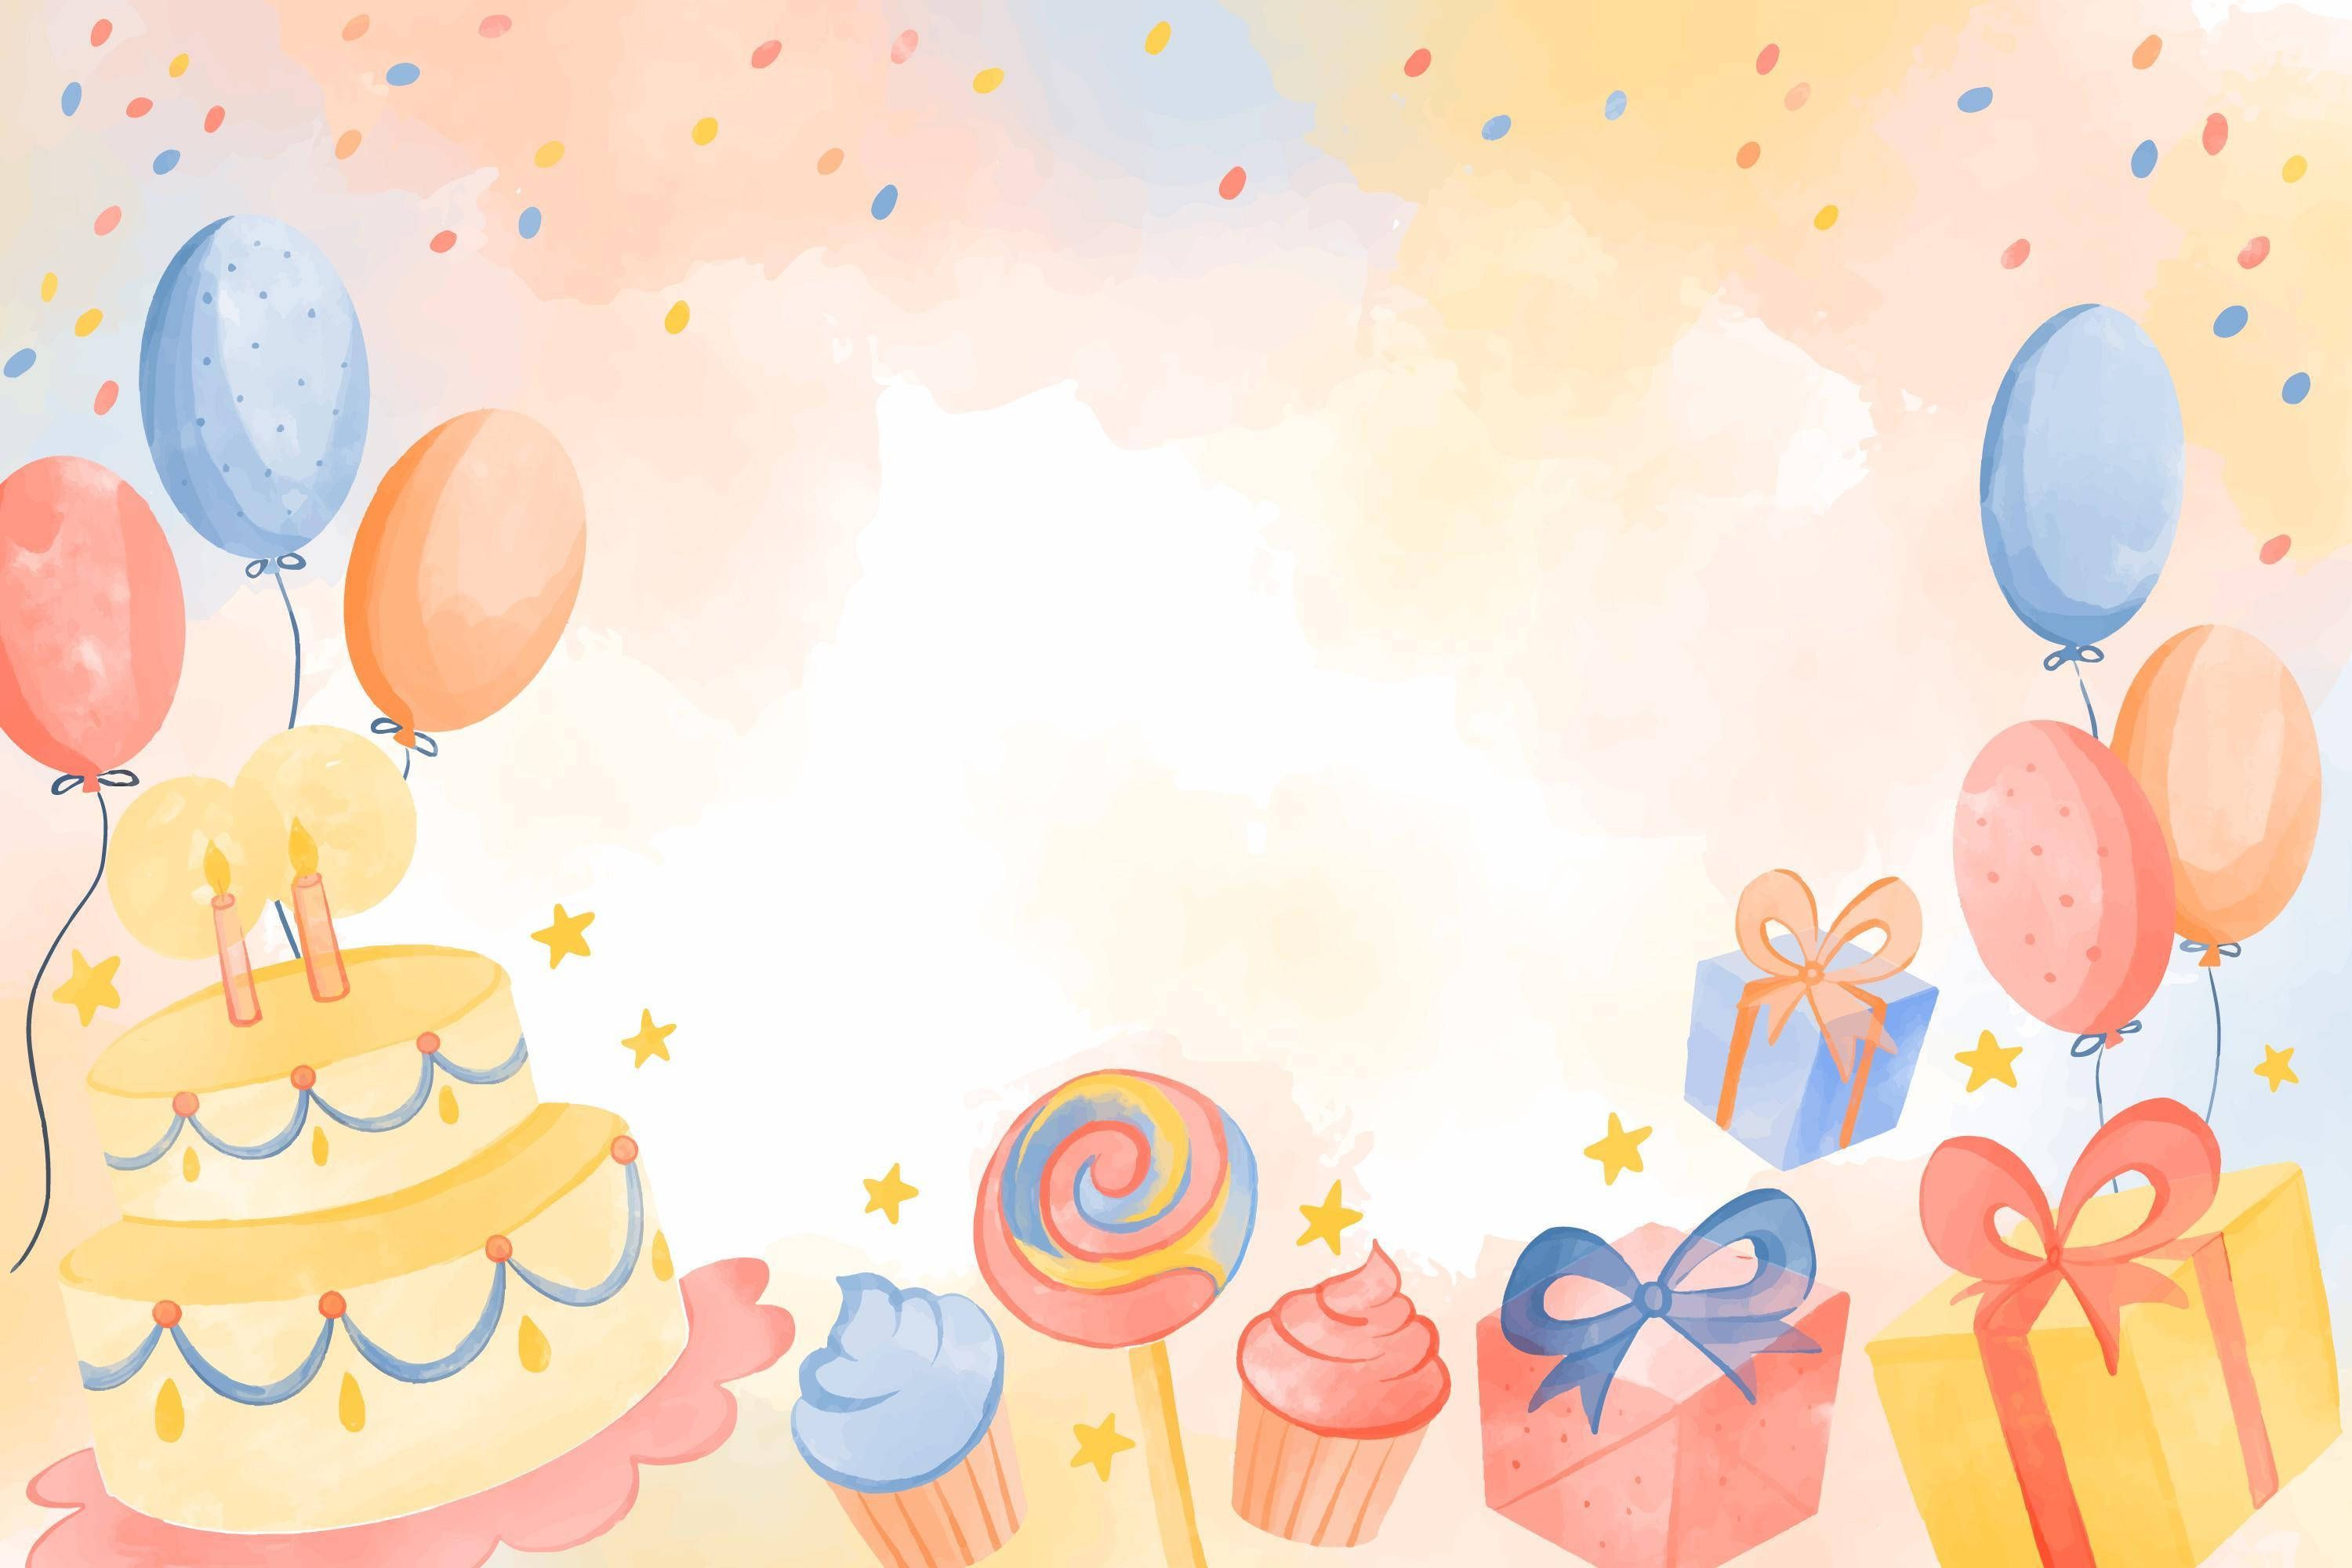 A watercolor background with balloons and cake - Birthday